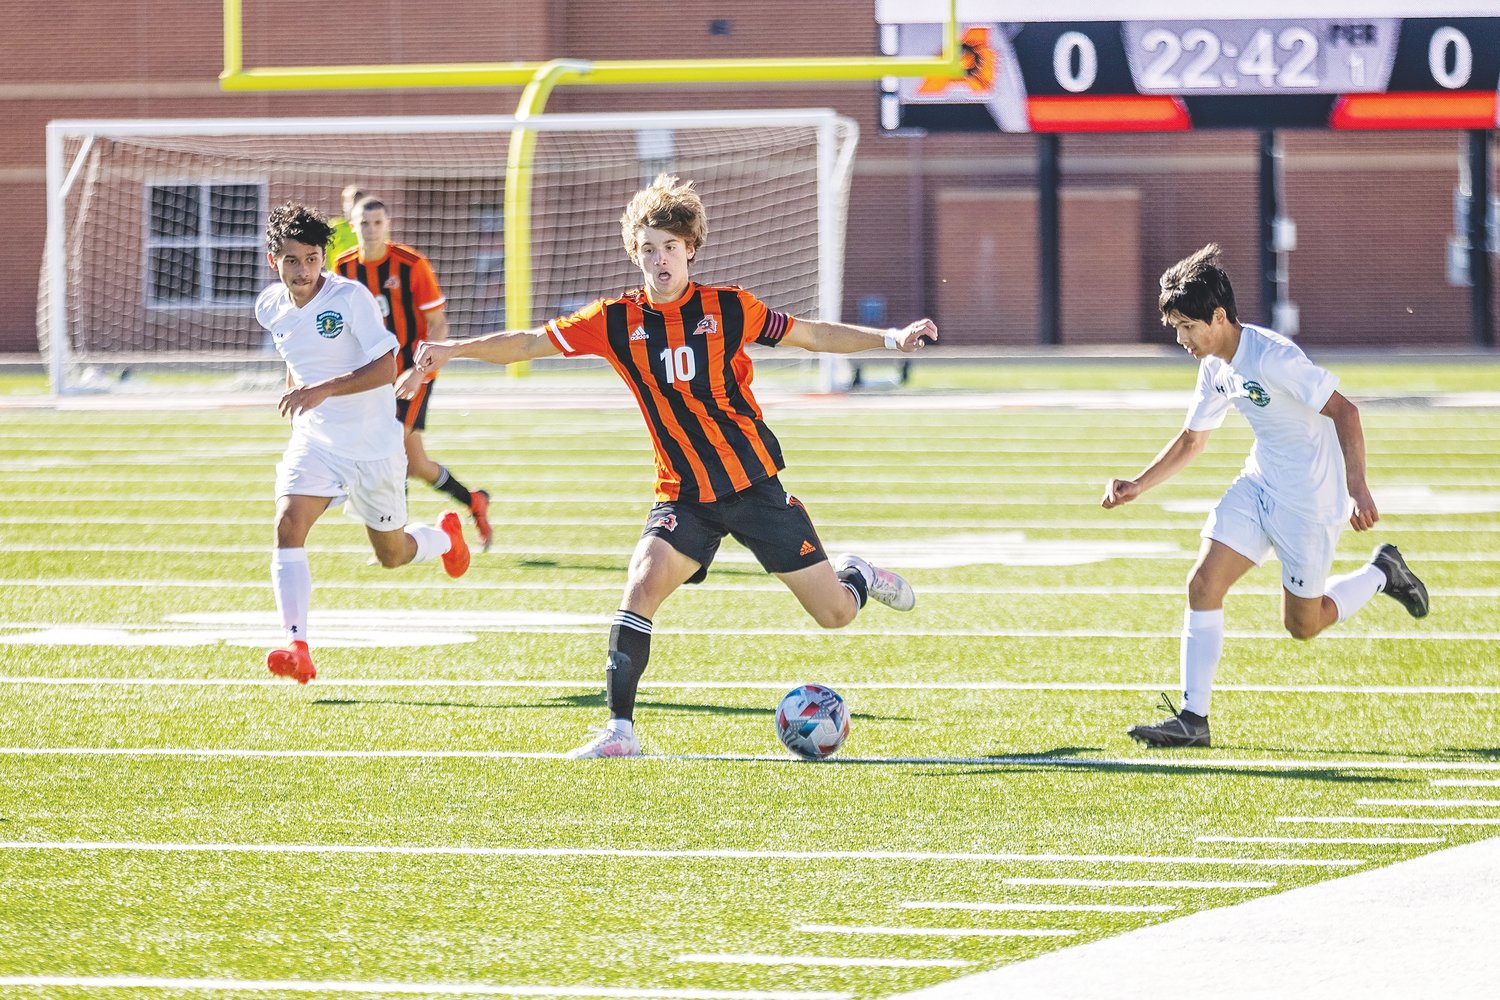 Clay Murador returned from an injury to score two goals against Benbrook.